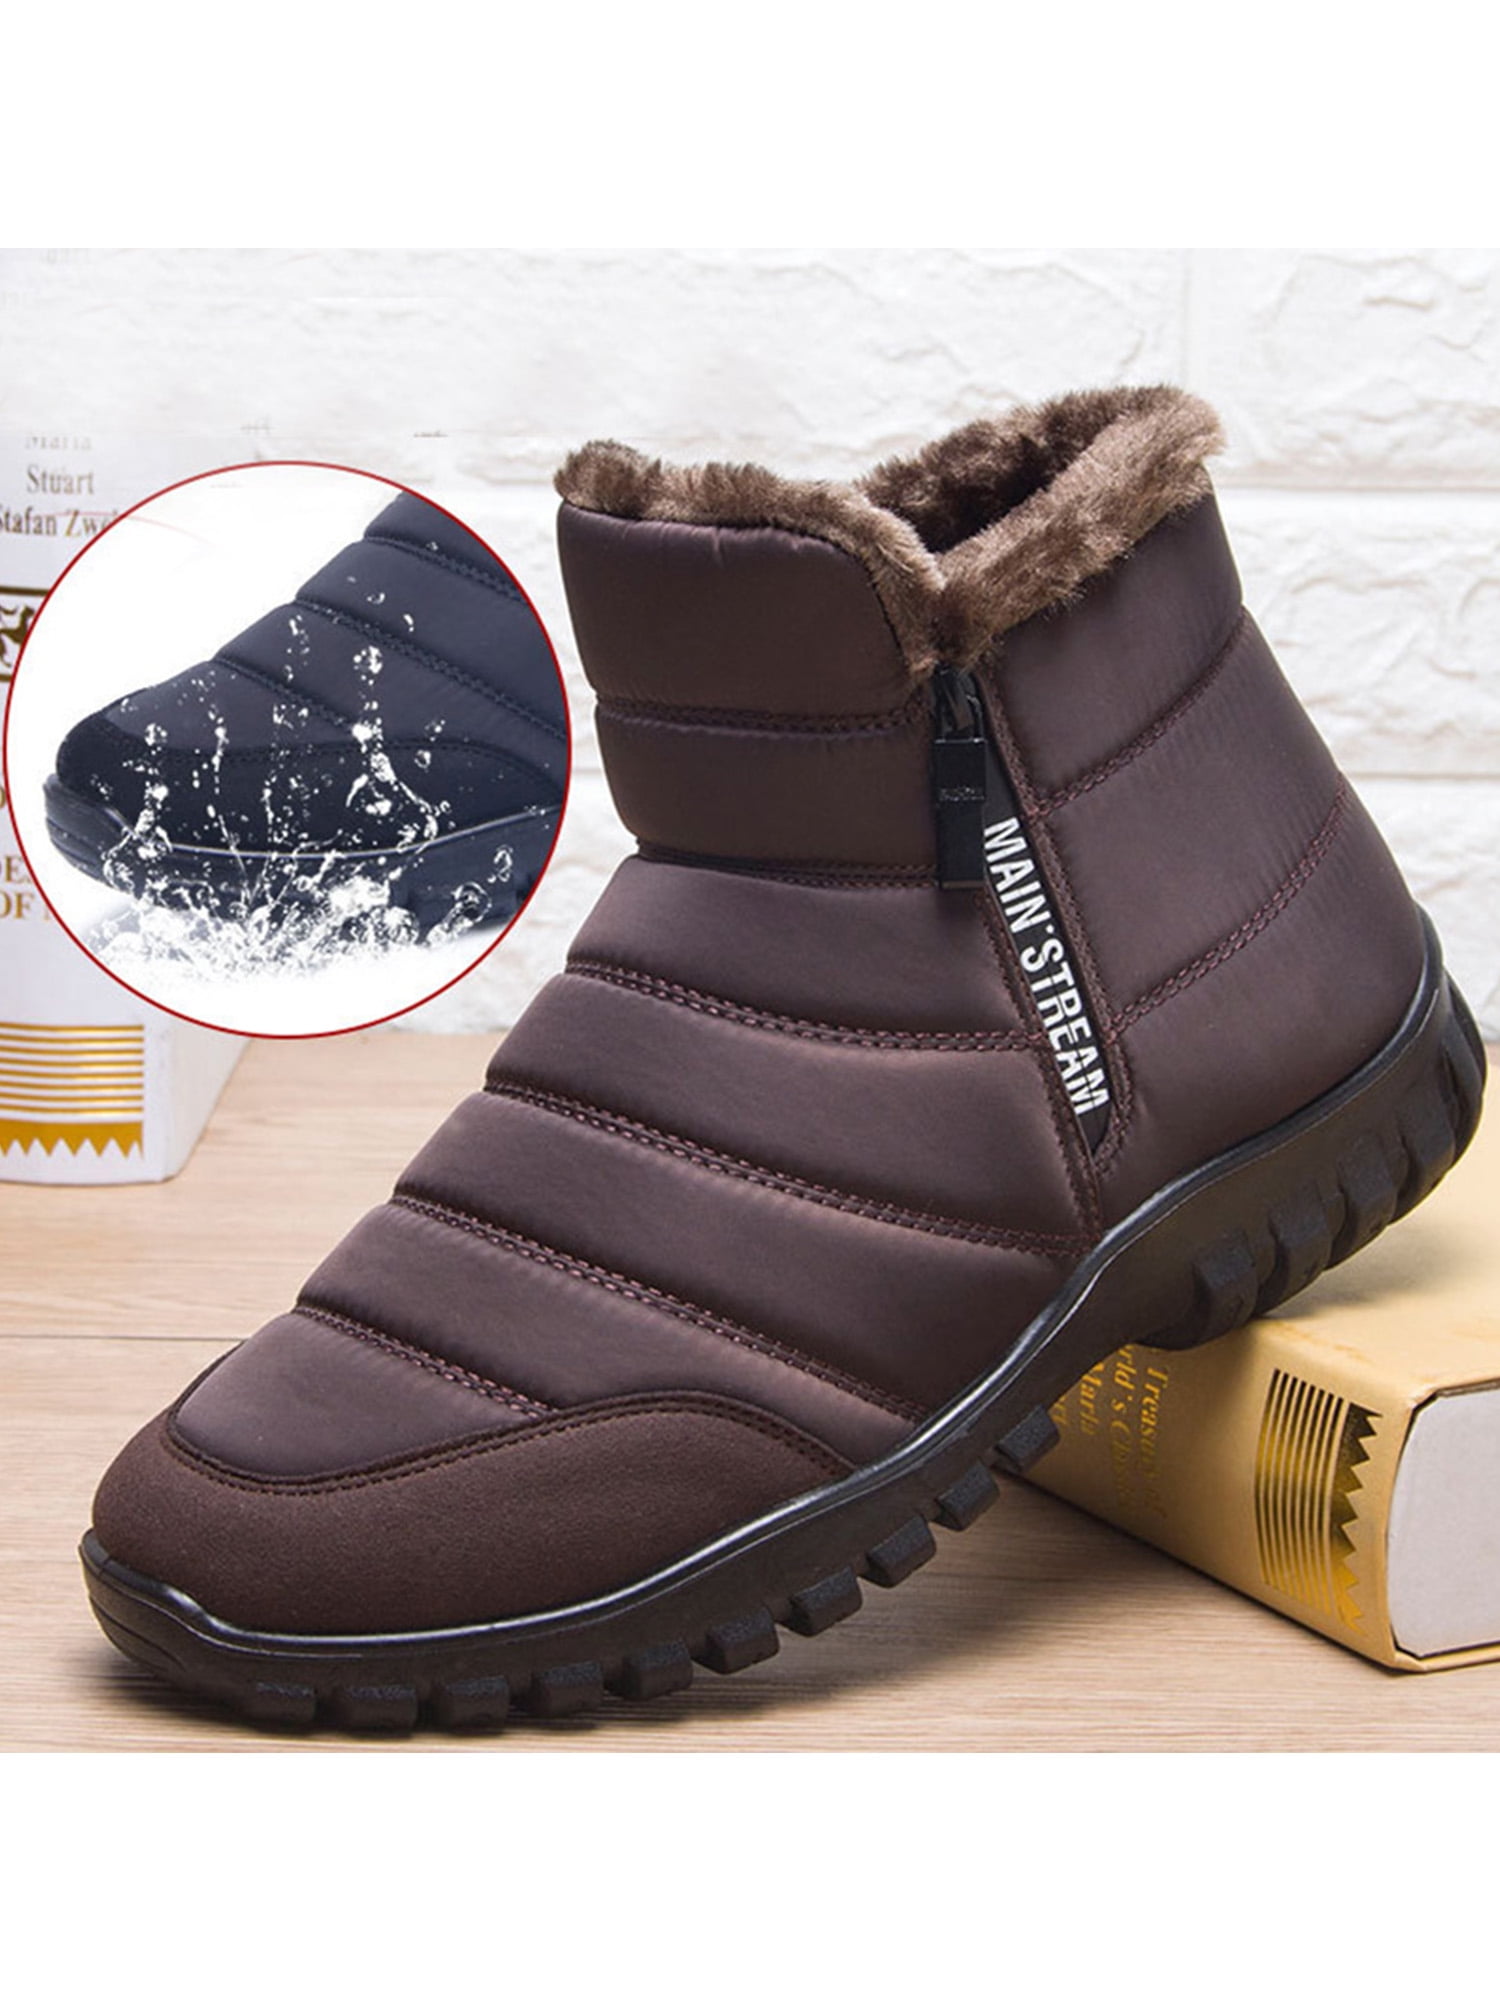 The 6 Best Winter Boots of 2023 | Tested by GearLab